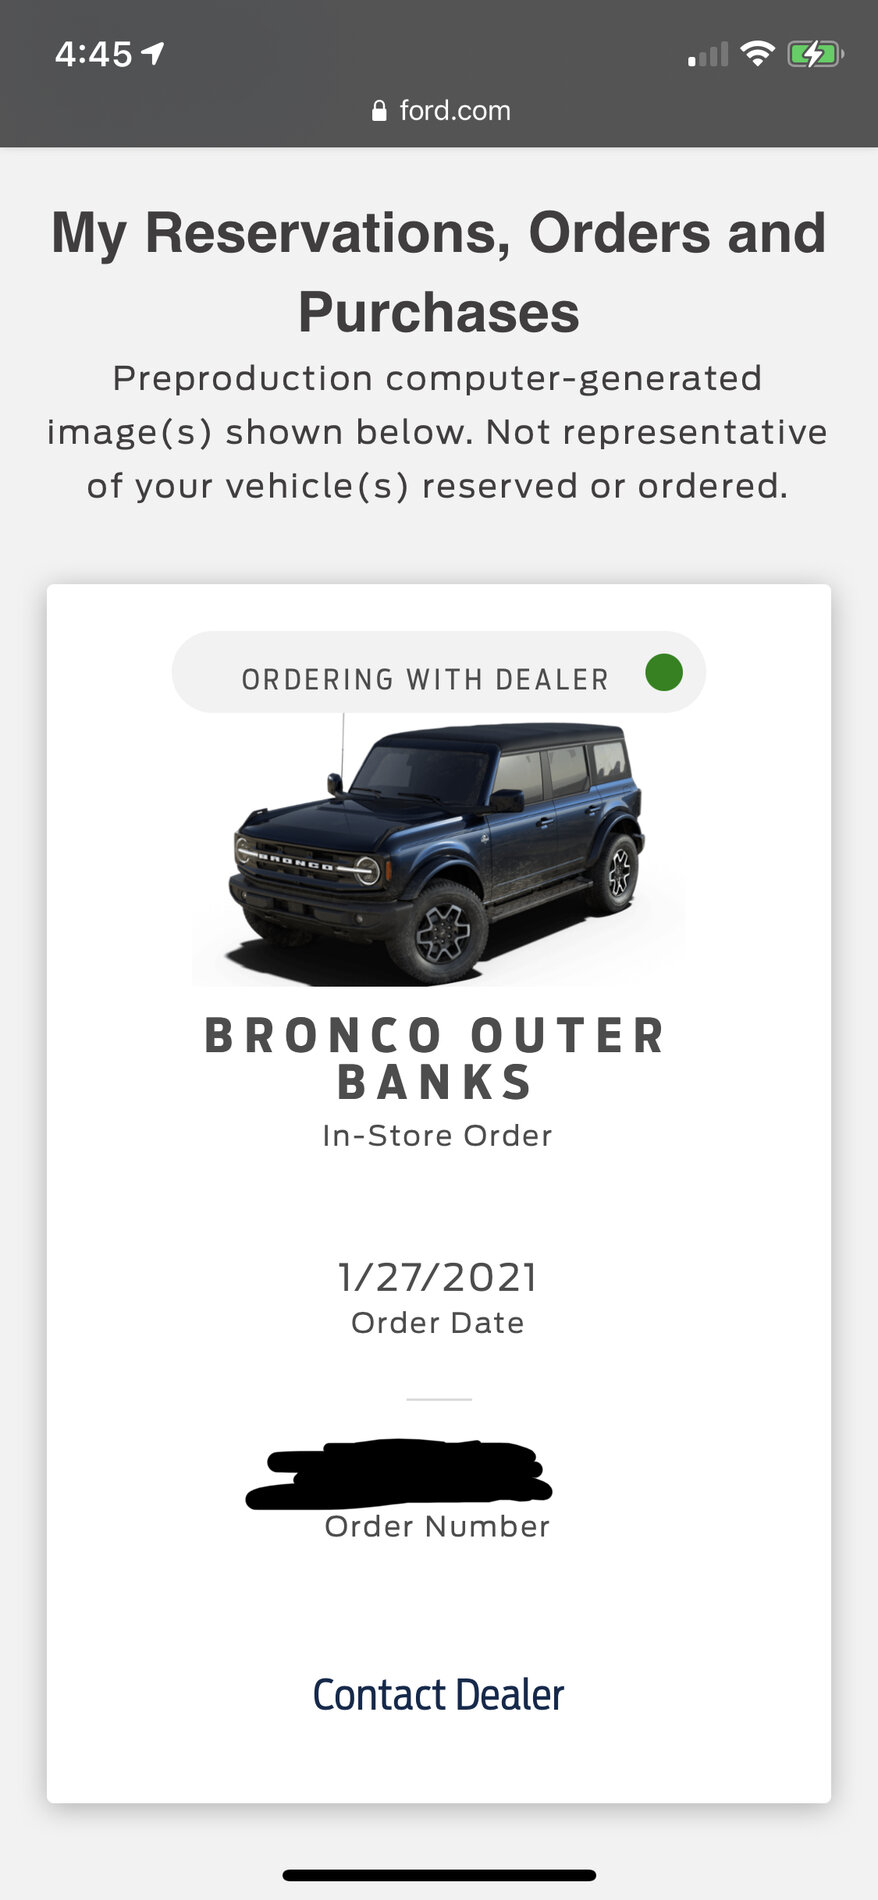 Ford Bronco New Green Dot + "Ordering With Dealer") showing on Ford.com My Reservations Page C71214E6-9C37-4B18-BCBC-8B704B88CA0C